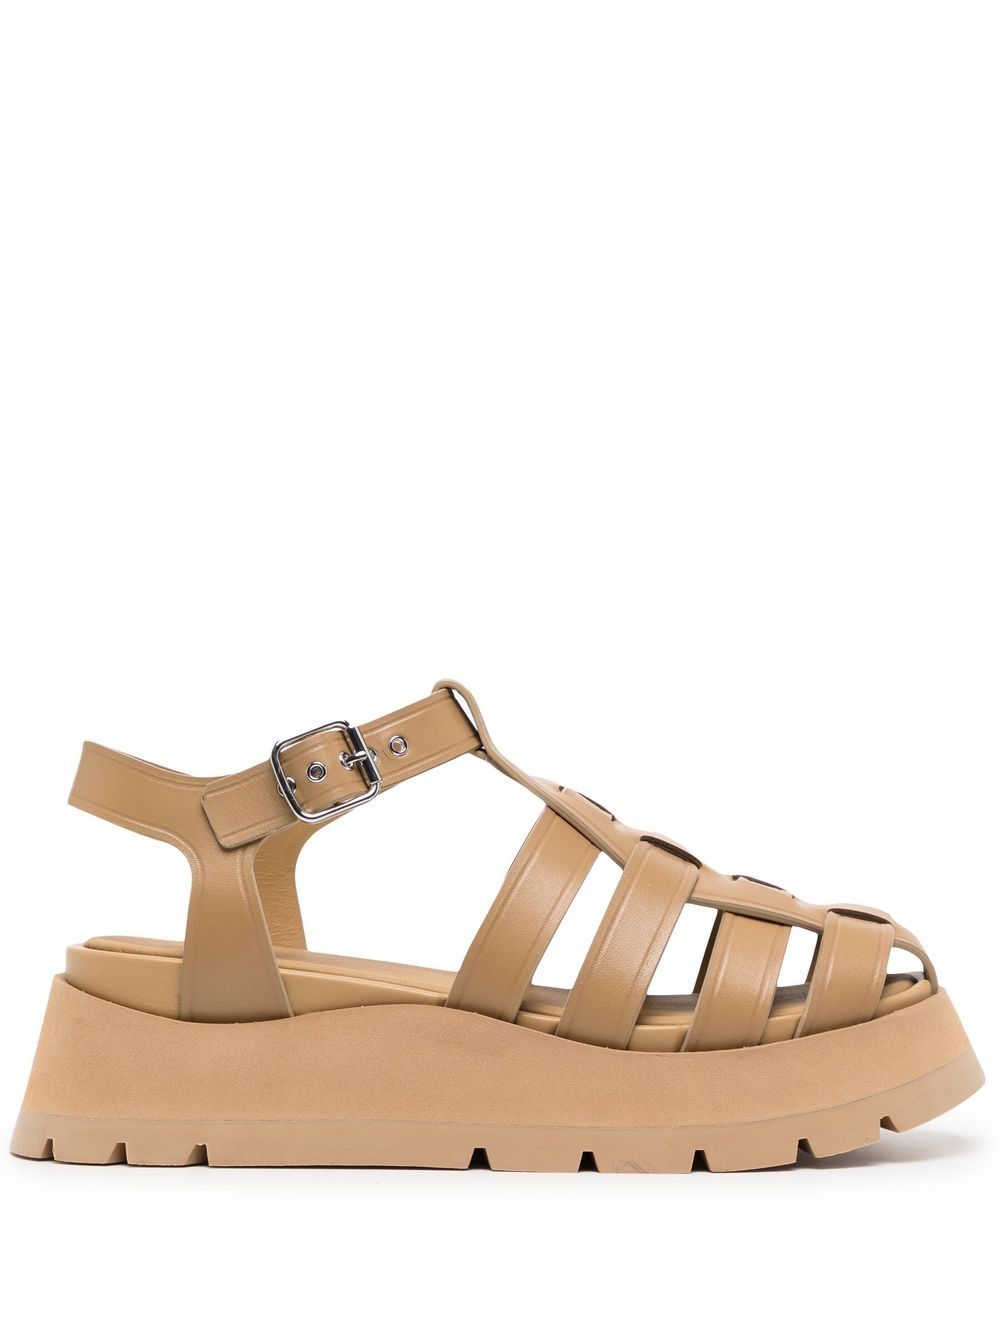 3.1 Phillip Lim Women's Kate Fisherman Leather Lug-sole Sandals In ...